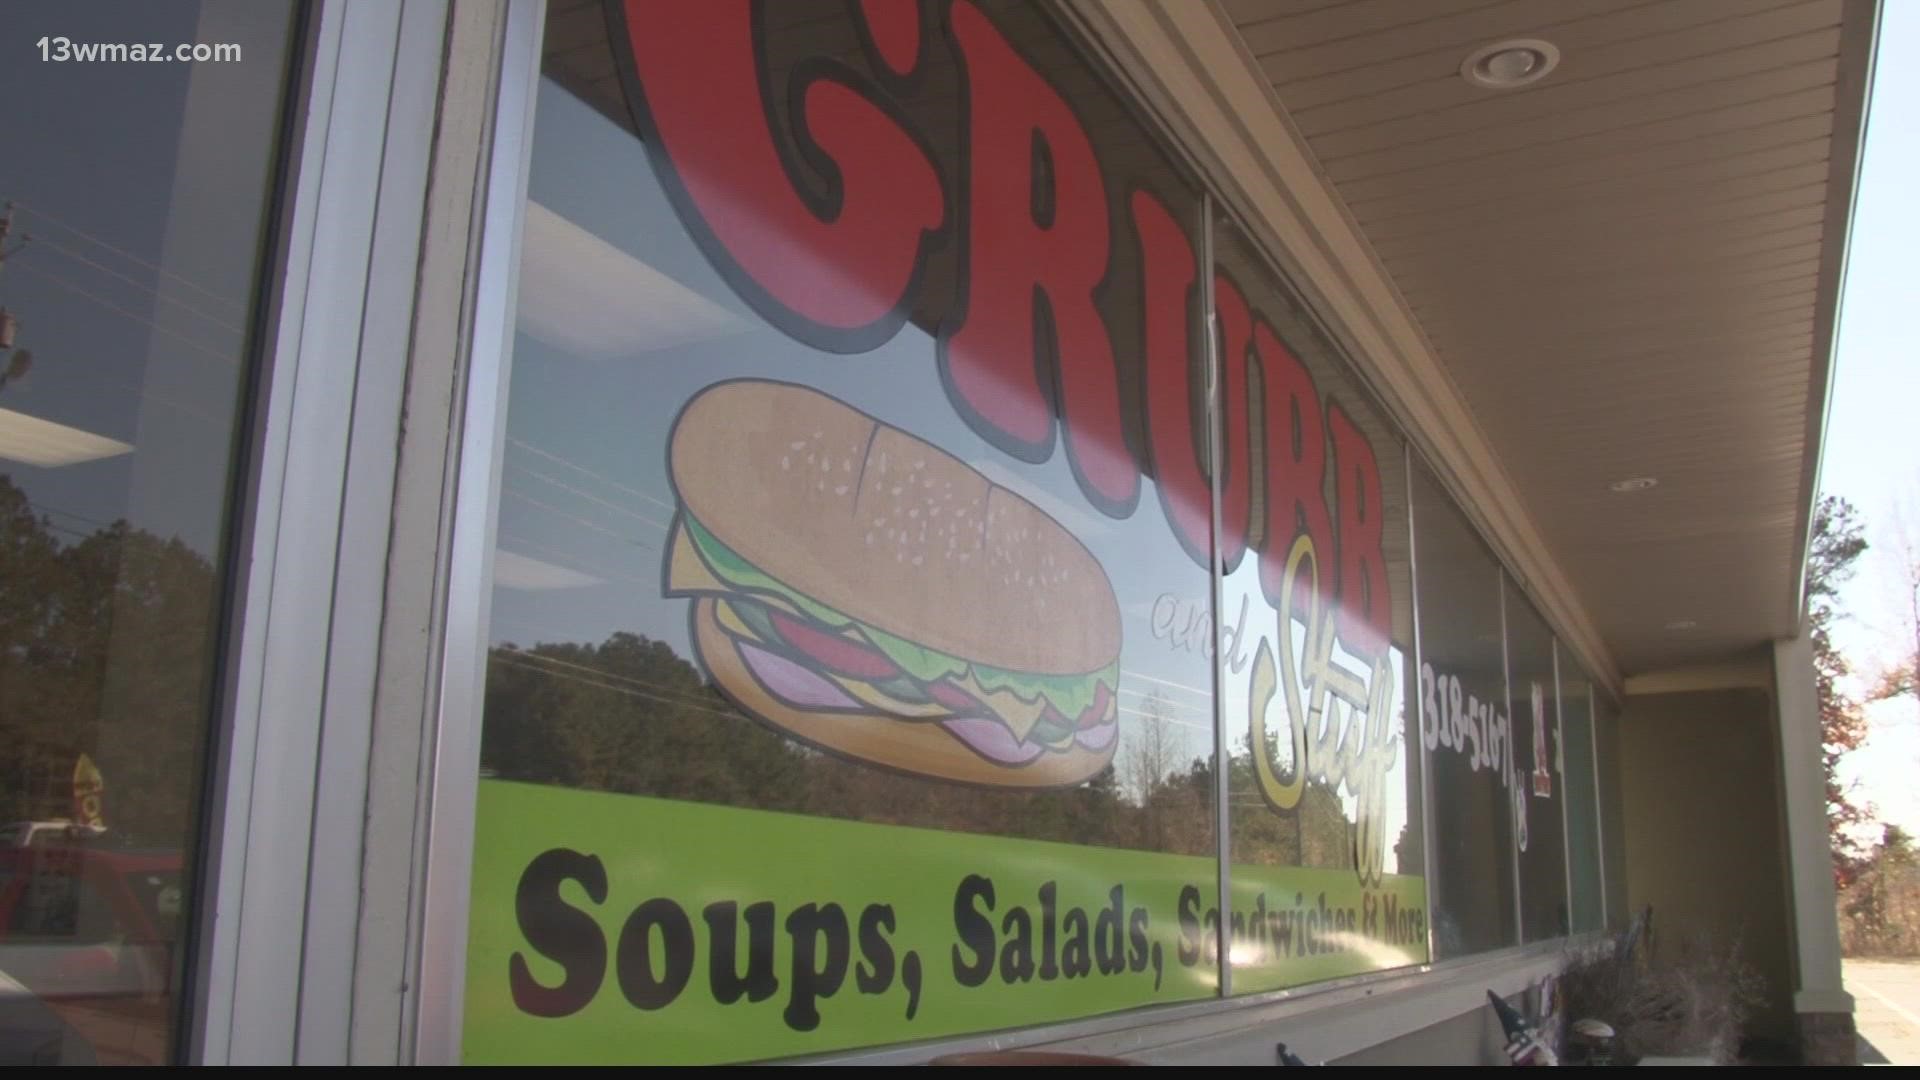 Grubb & Stuff first opened its doors in 2019. The pandemic hit them hard in 2020, and they weren't able to overcome an increase in prices this year.